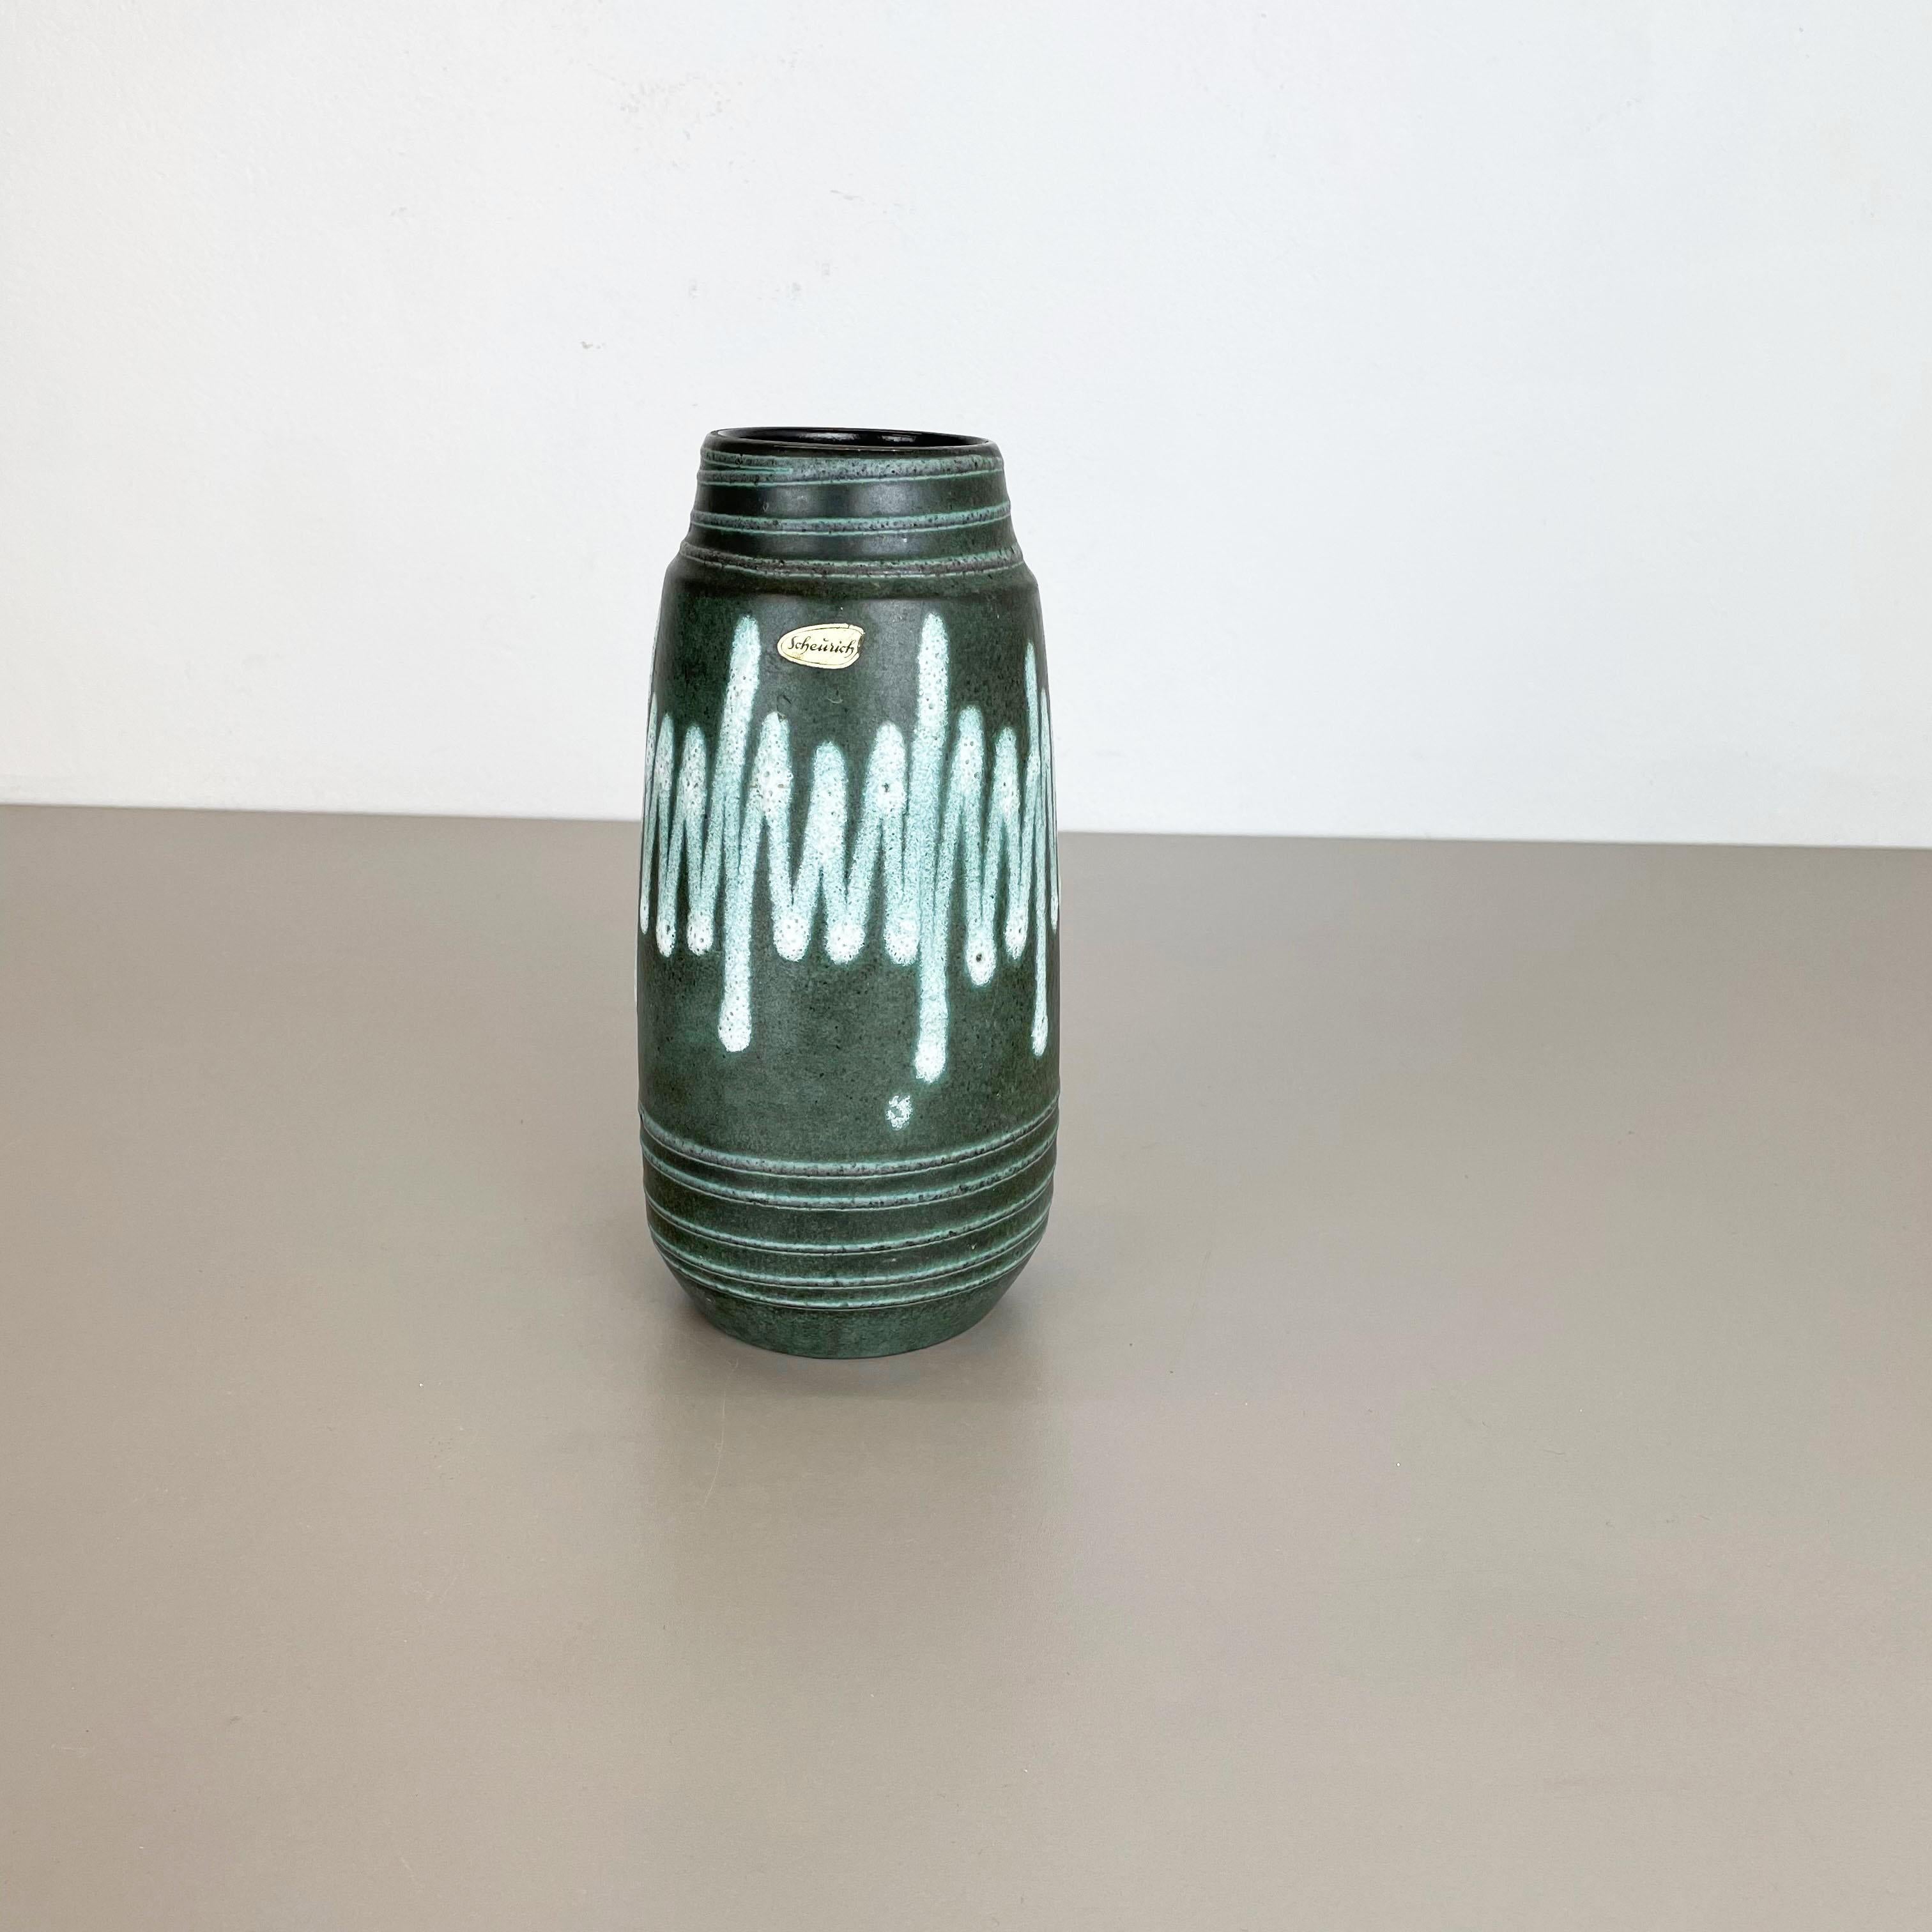 Article:

Fat lava art vase super rare green white coloration


Model: 203-26


Producer:

Scheurich, Germany



Decade:

1970s




This original vintage vase was produced in the 1970s in Germany by Scheurich. It is made of